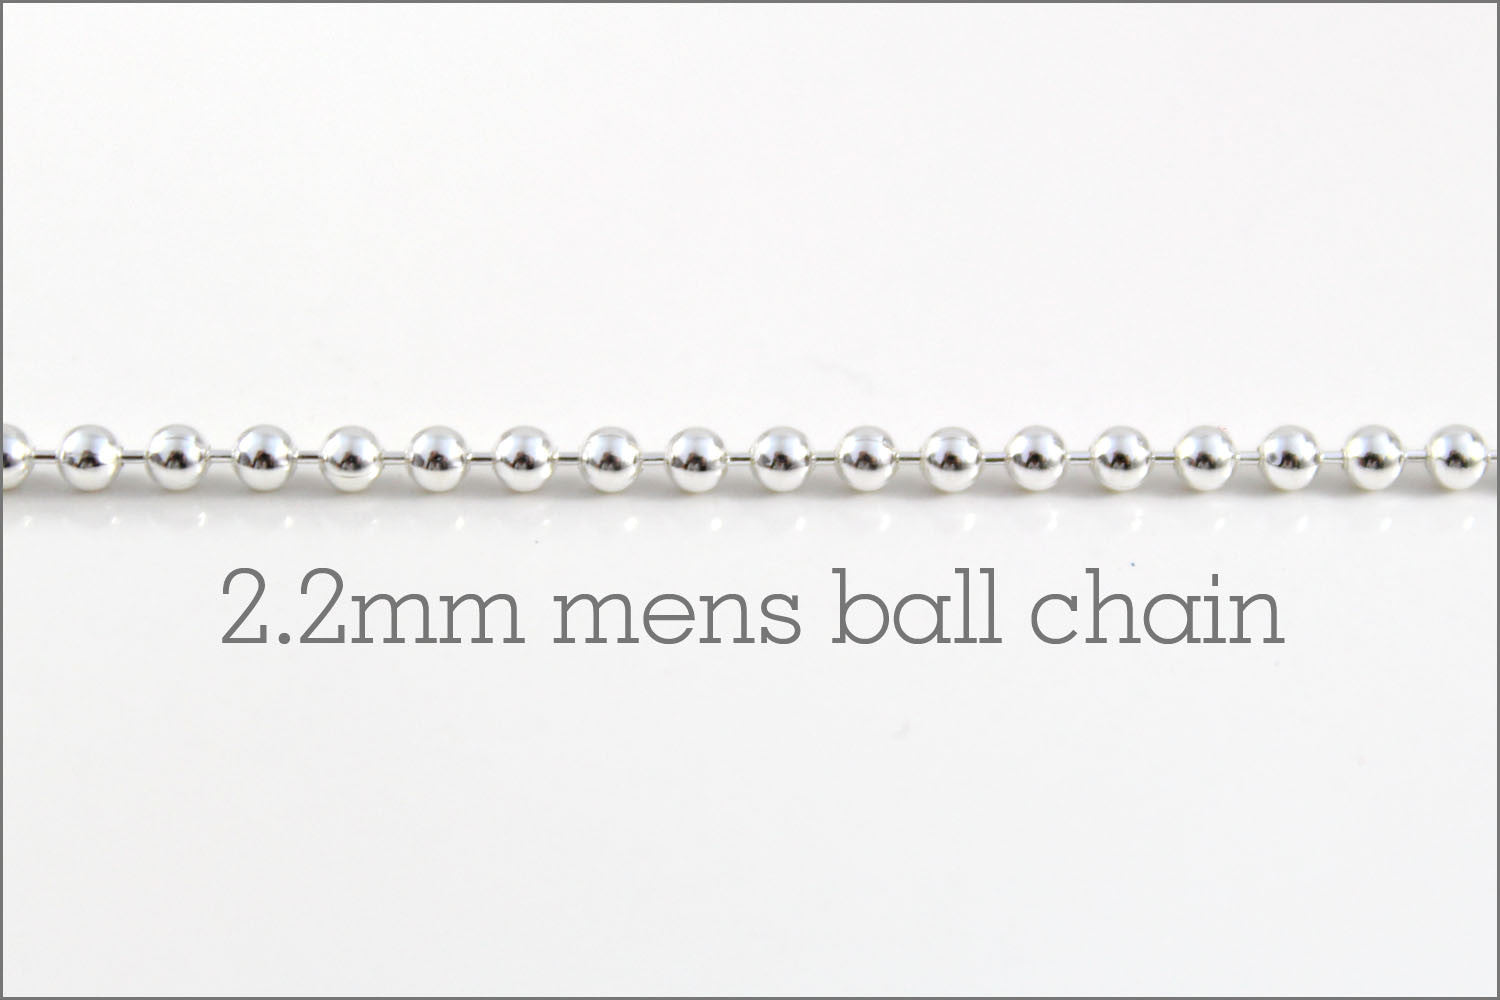 Men's 2.2mm Sterling Silver Ball Chain | New Chain or Chain Replacement, a.k.a. originals